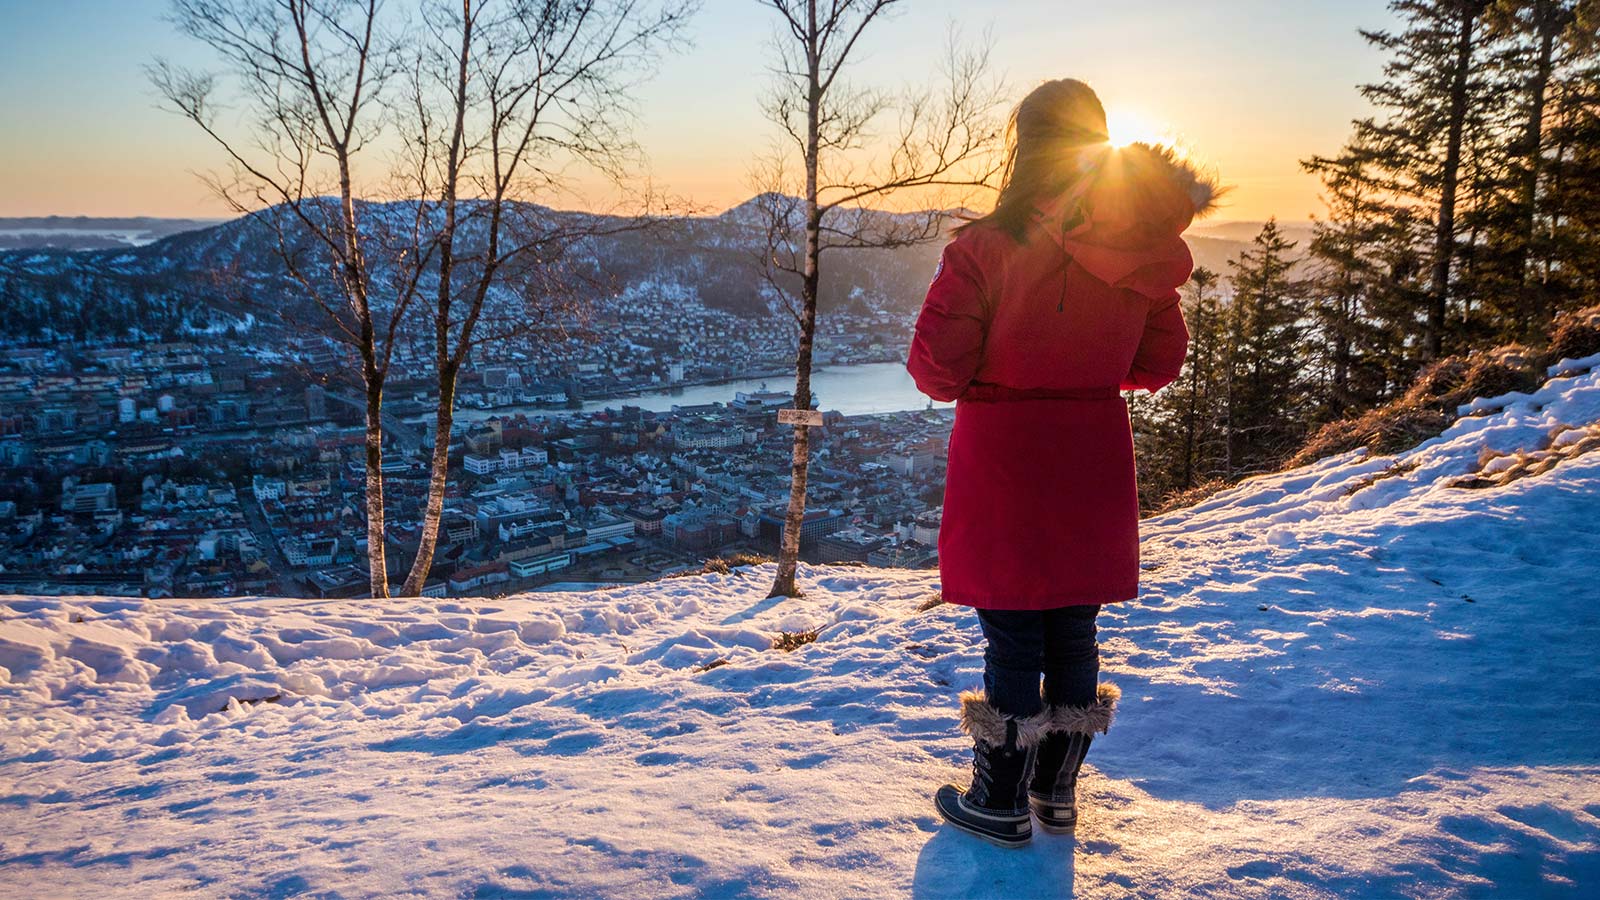 Want to know what to pack for Norway in winter? For exploring the cities, trails, and fjords we have the ultimate Norway winter packing list for the family